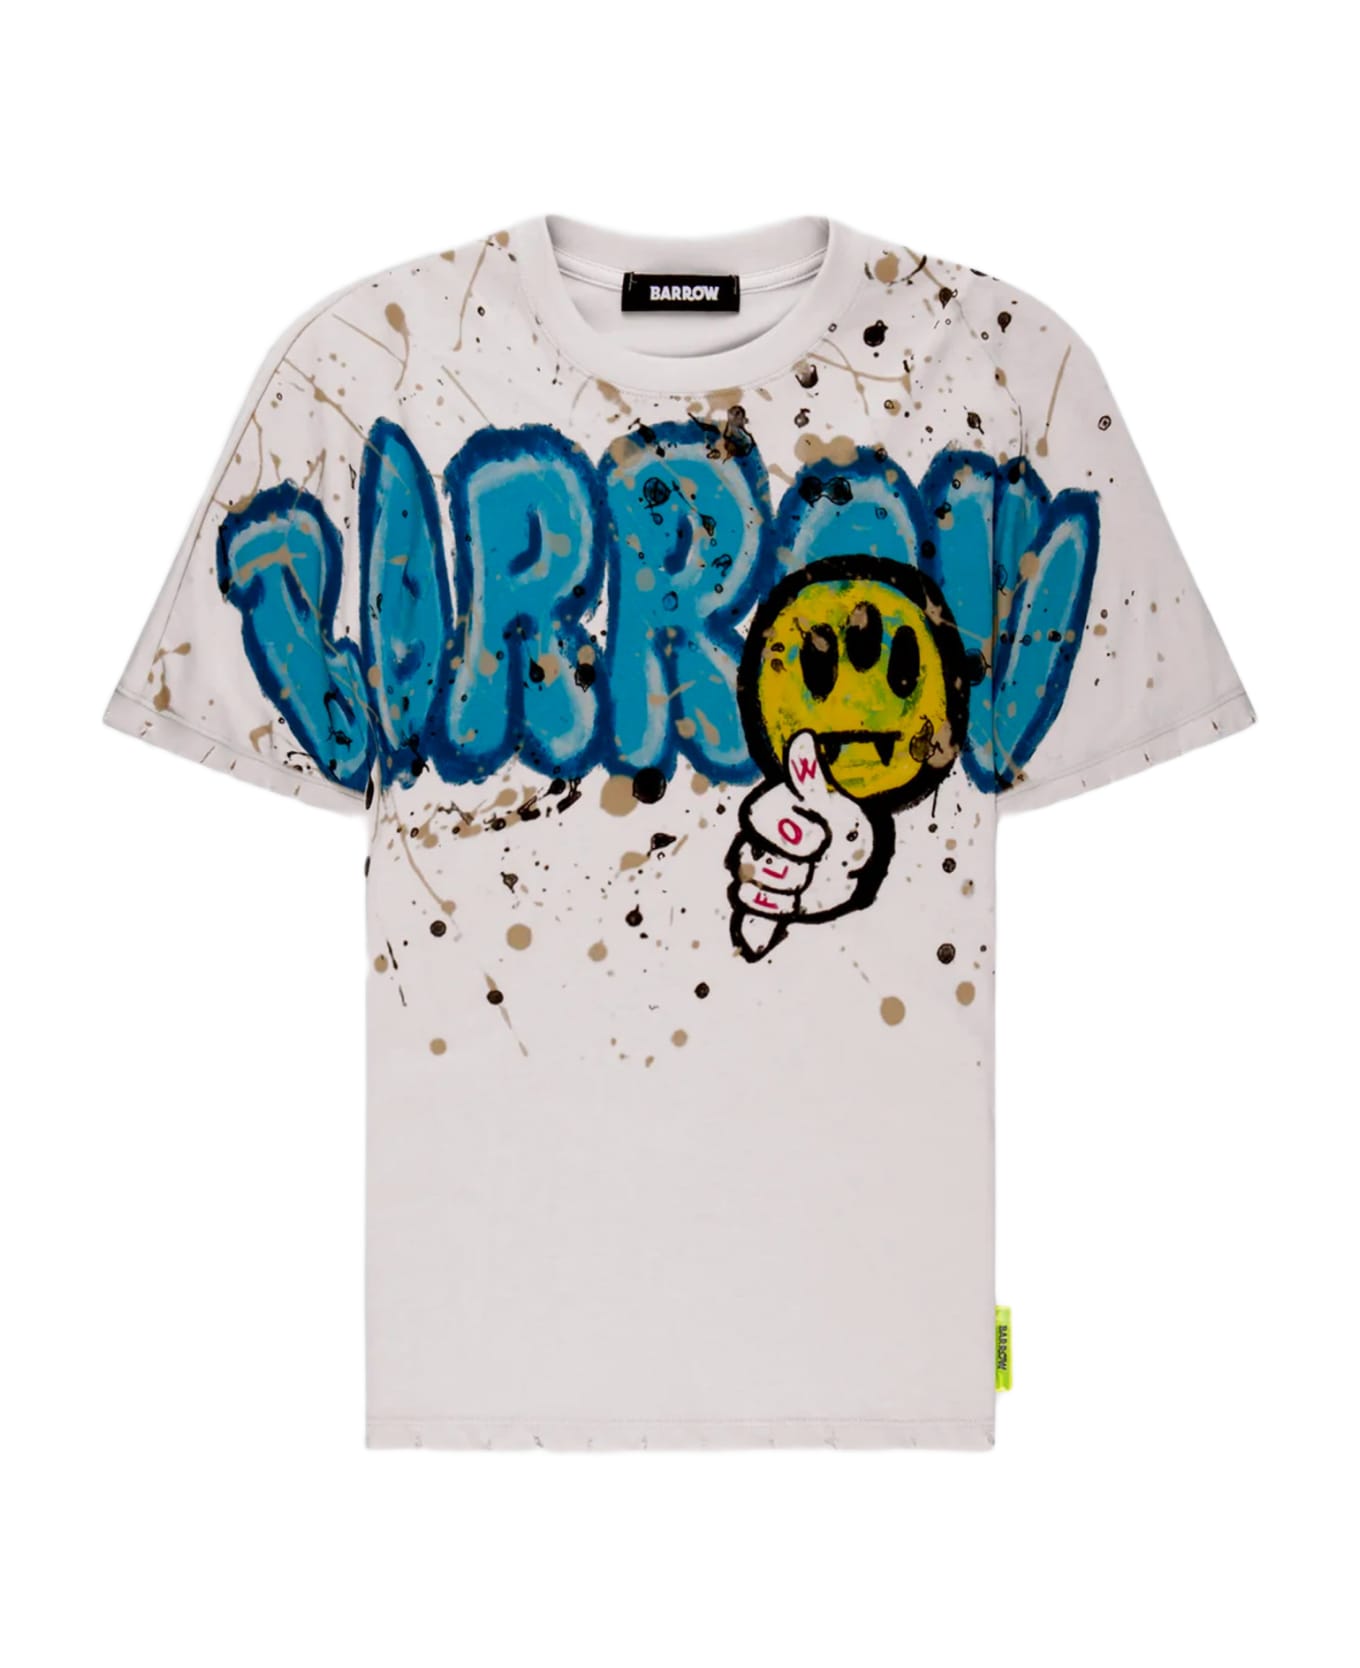 Barrow Jersey T-shirt Unisex Off White Cotton T-shirt With Graffiti Logo And Smile Print - Bianco